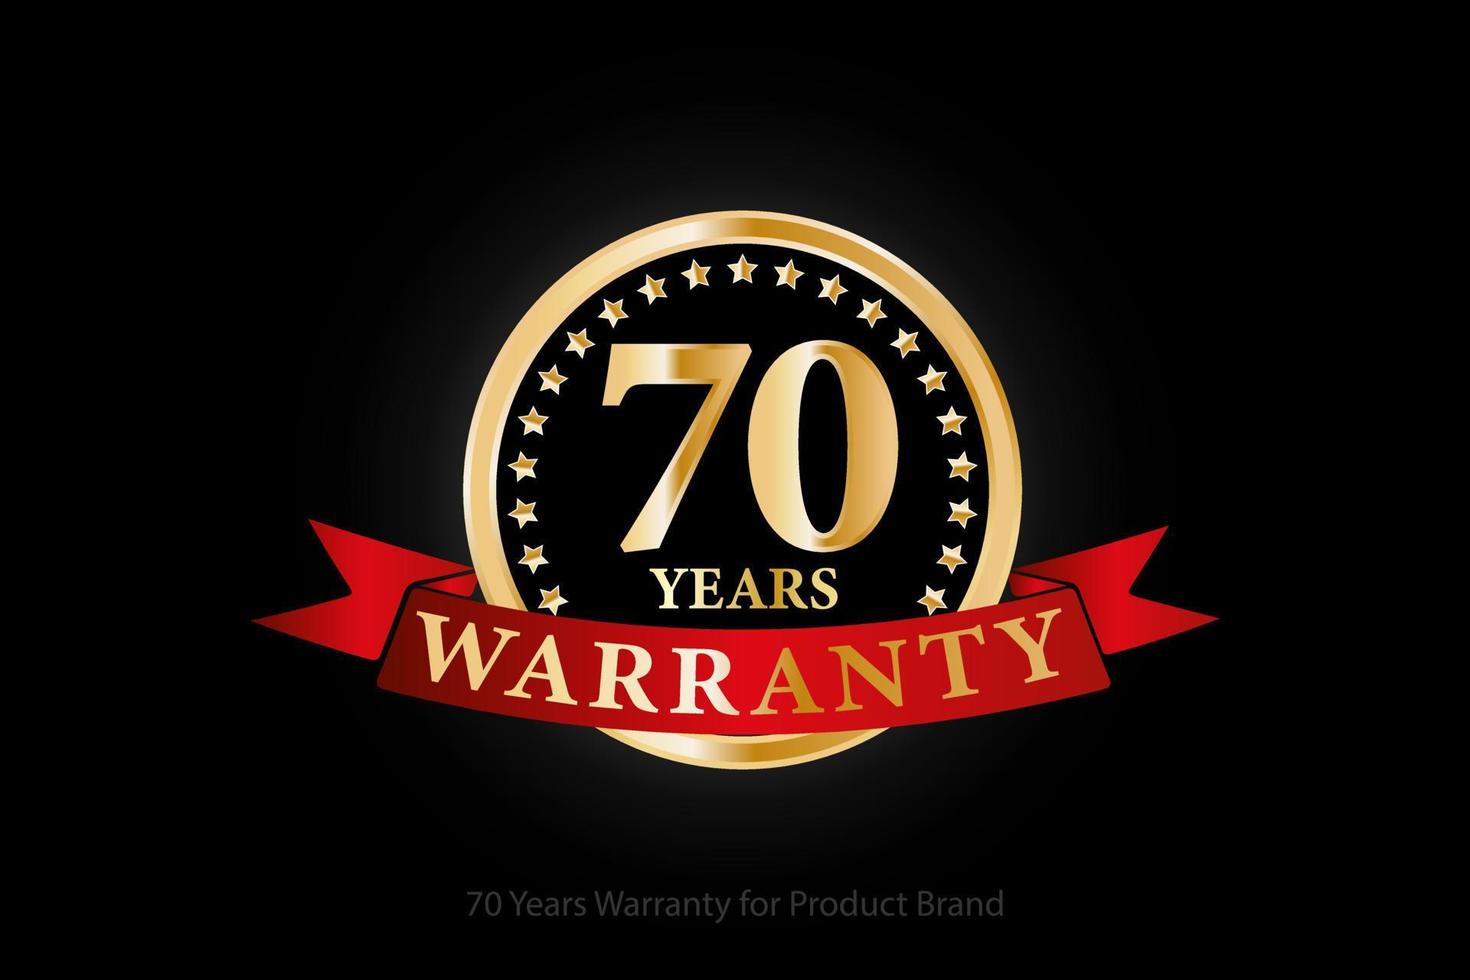 70 years golden warranty logo with ring and red ribbon isolated on black background, vector design for product warranty, guarantee, service, corporate, and your business.